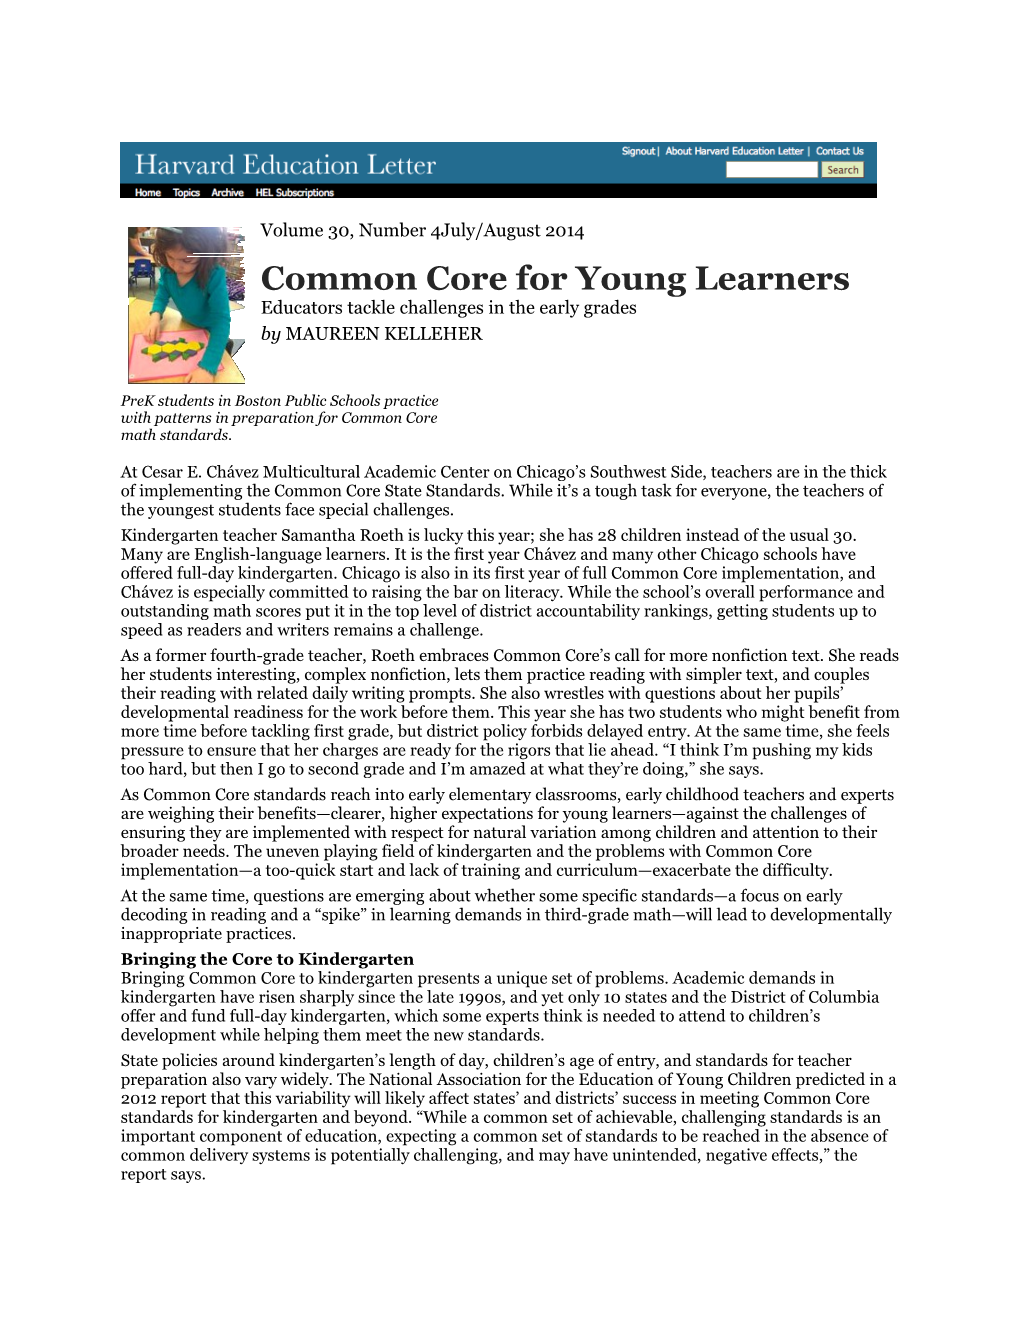 Common Core for Young Learners